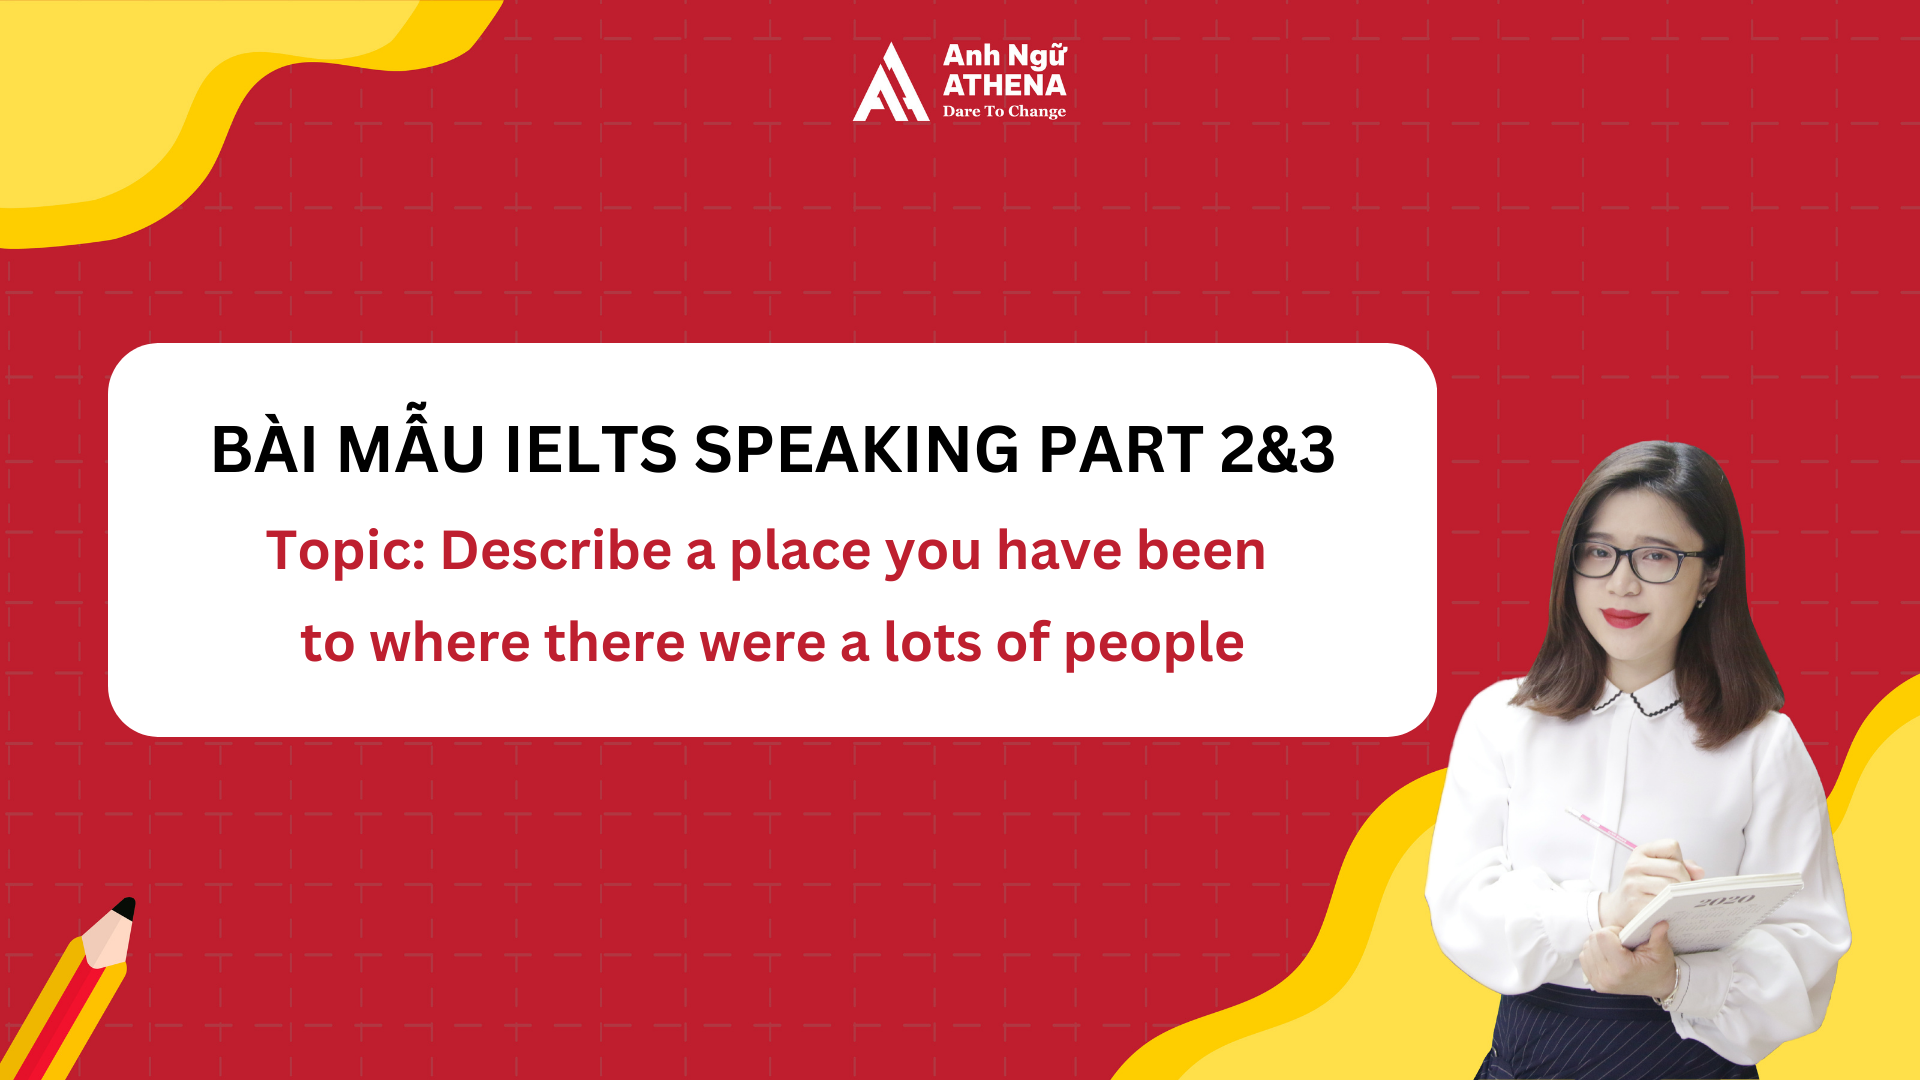 Bài mẫu IELTS Speaking Part 2&3: Describe a place you have been to where there were lots of people 